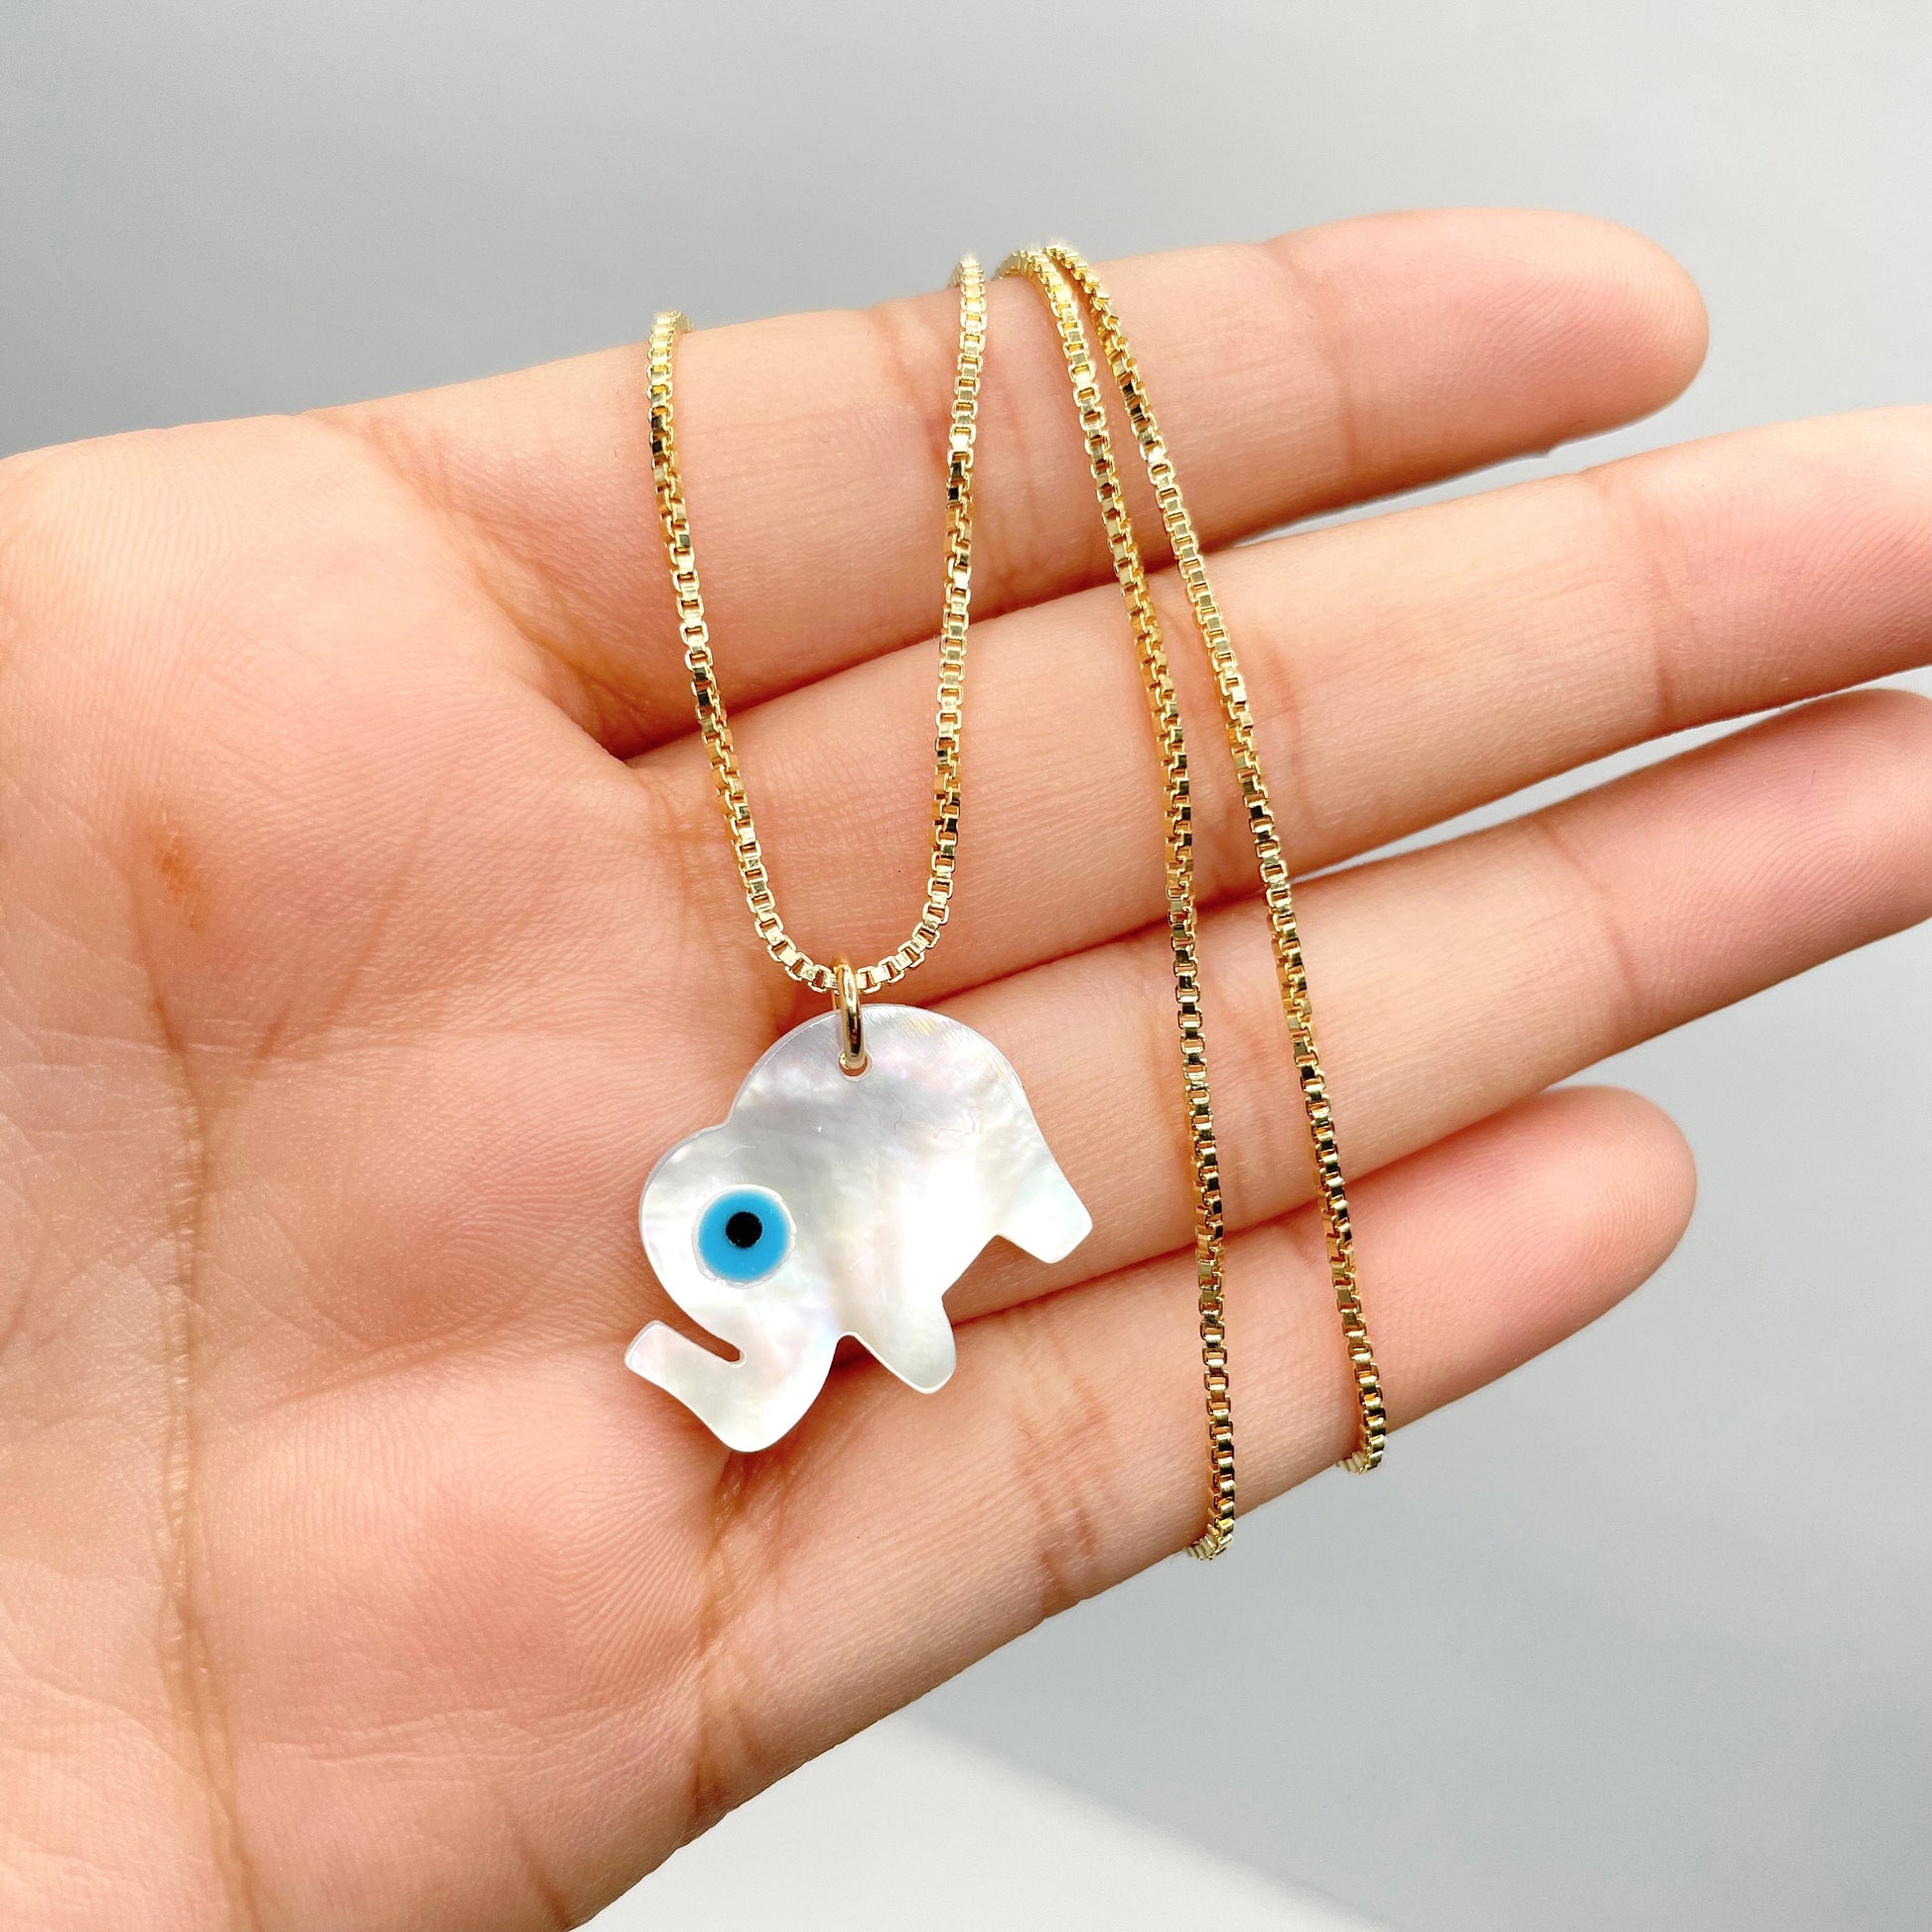 18k Gold Filled 1mm Box Chain Necklace with Elephant Madreperola Pendant and Evil Eye, Wholesale Jewelry Making Supplies